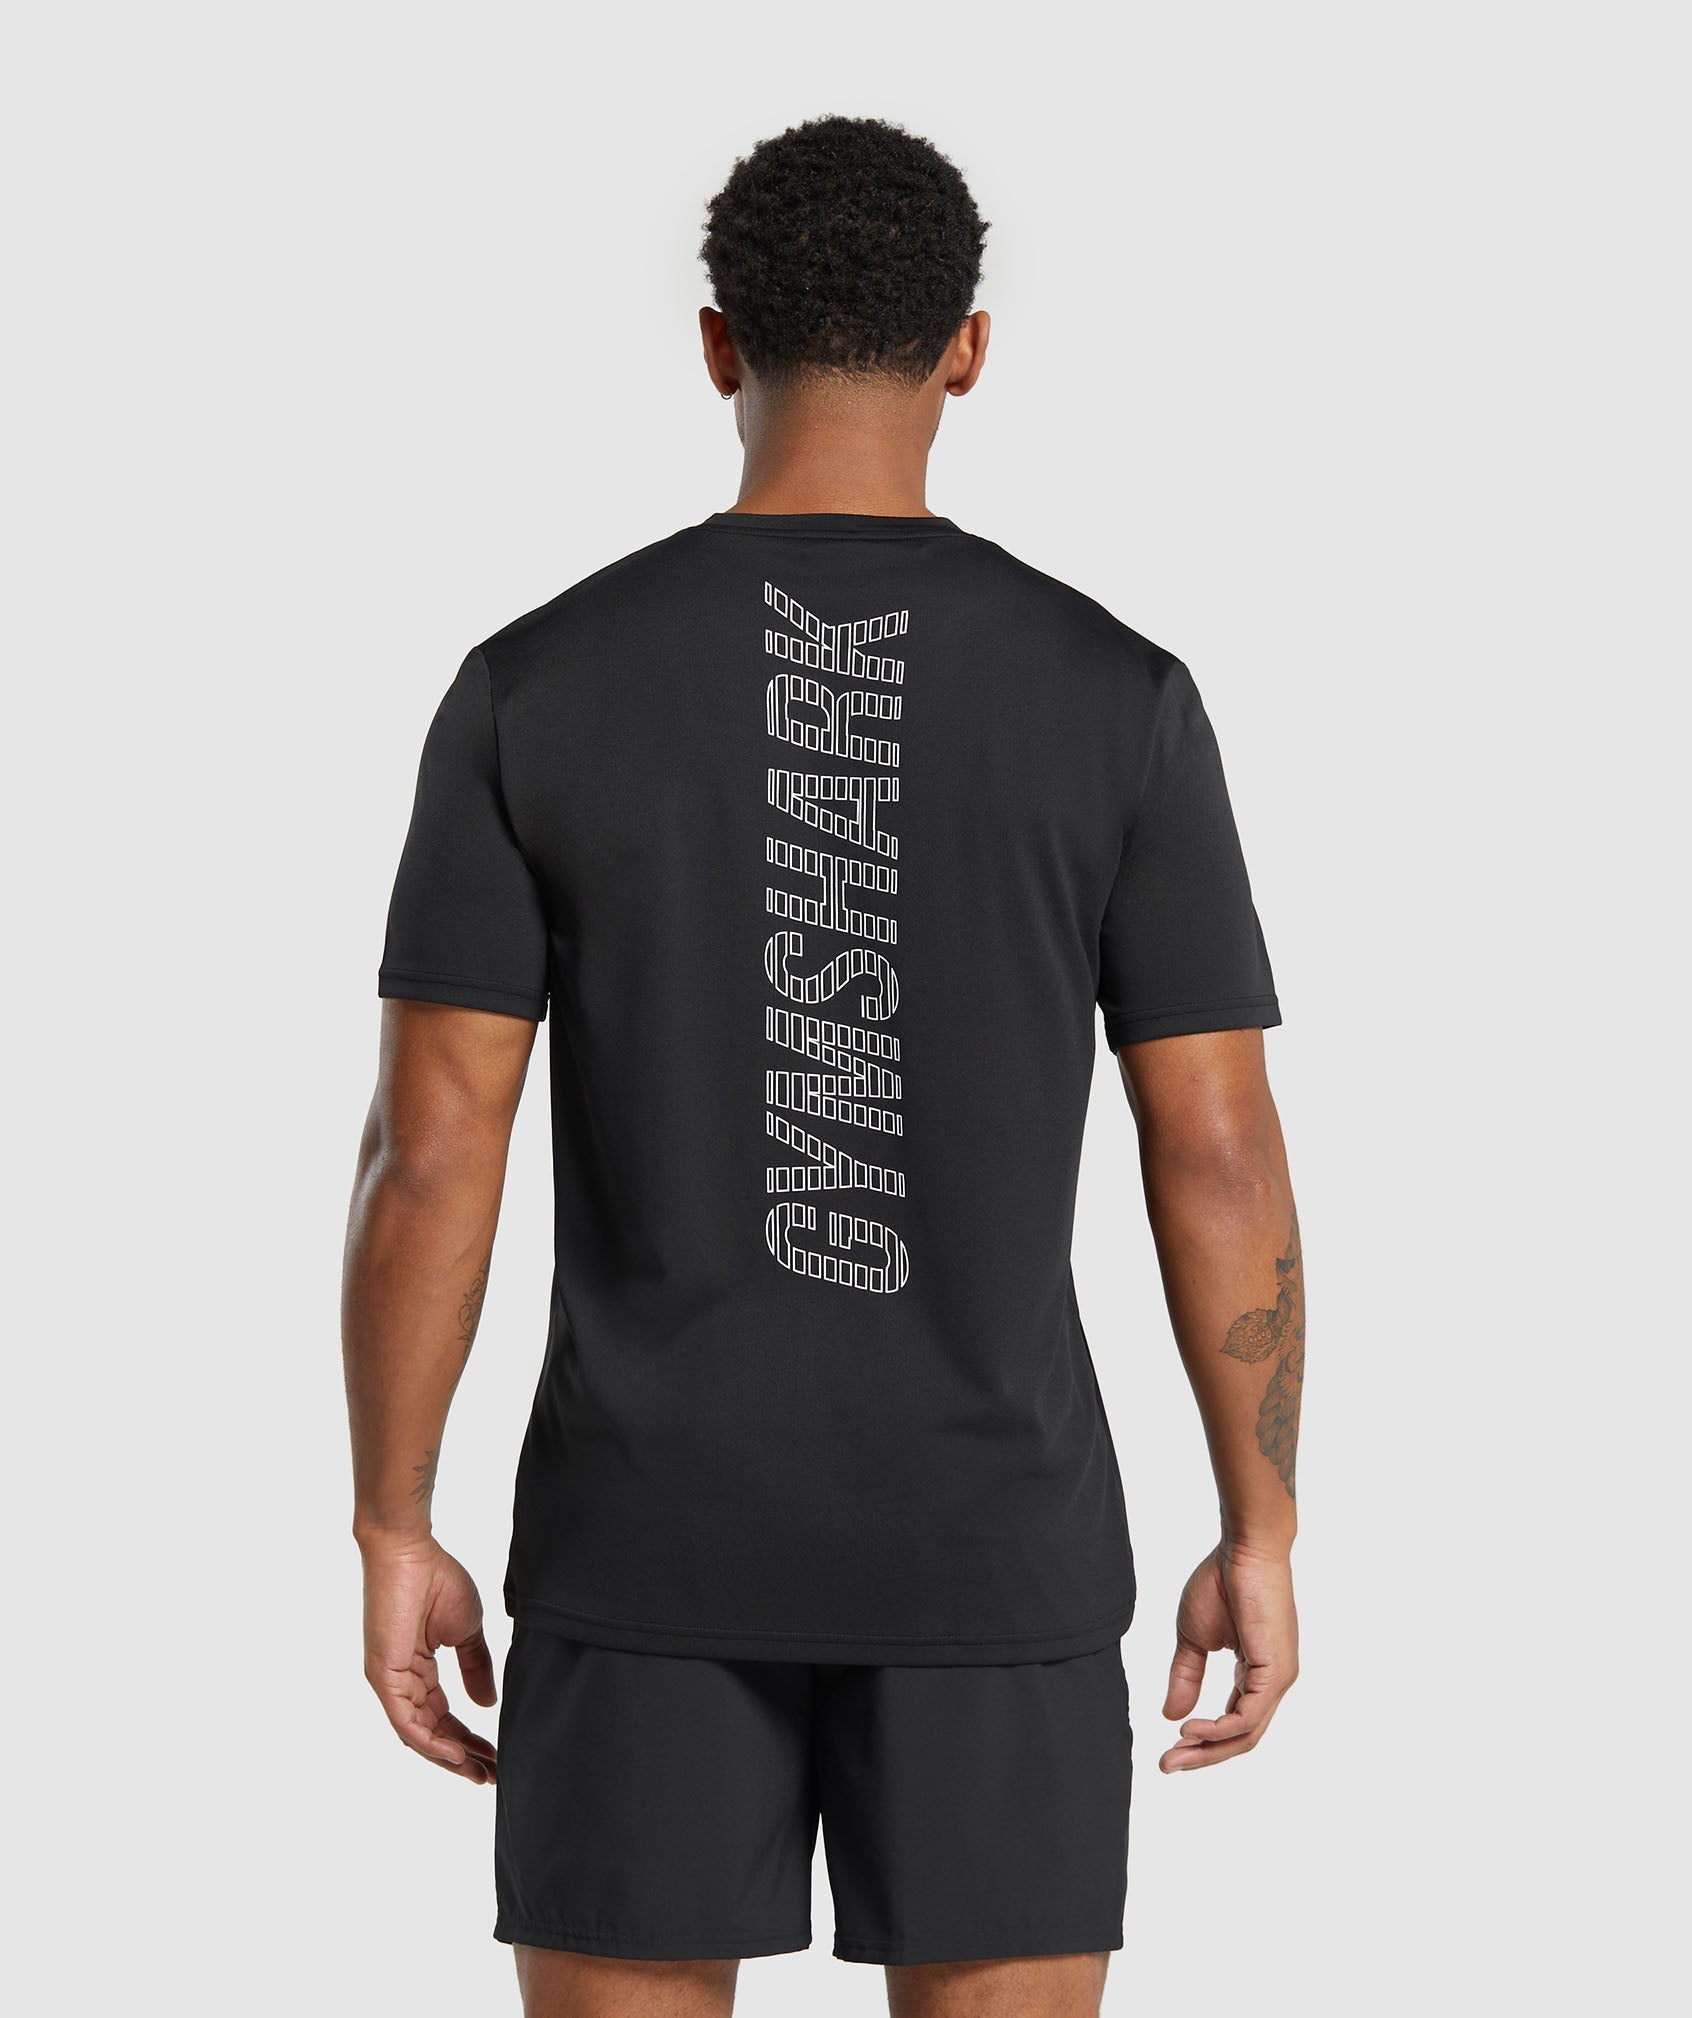 Conditioning Goods T-Shirt in Black - view 2